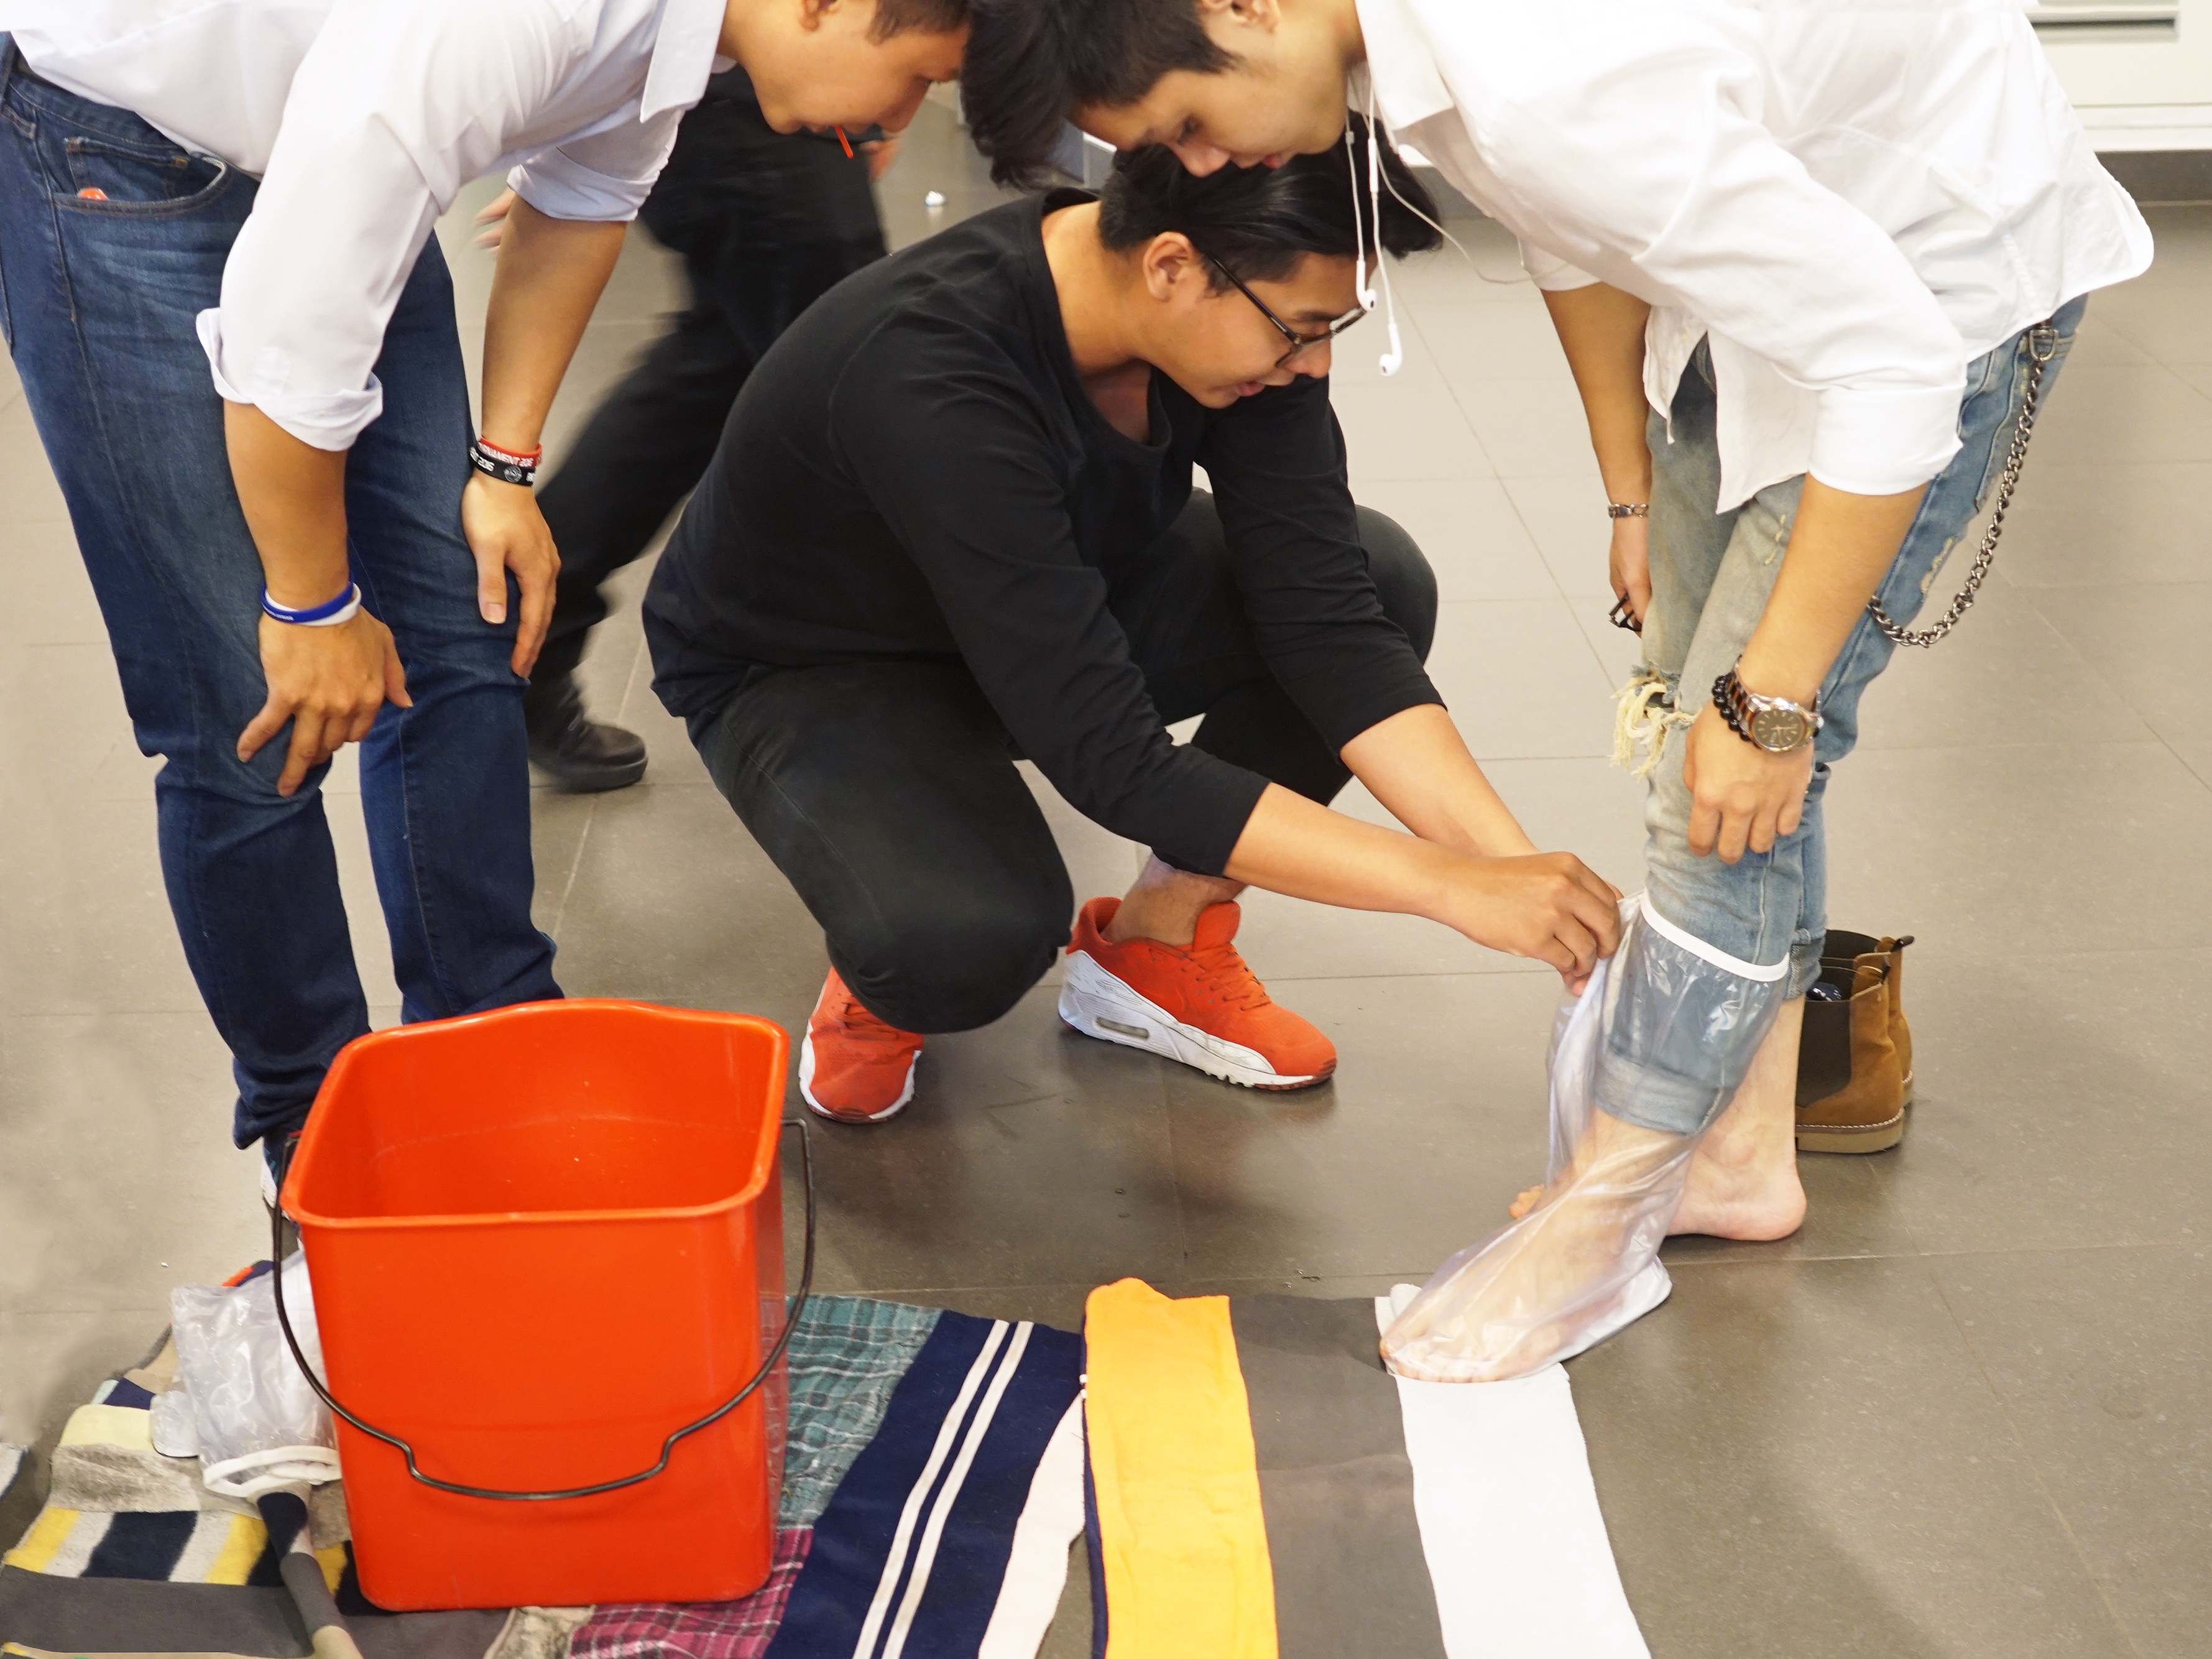 A visitor to the expo tests Conshoes, plastic shoe covers to protect shoes during the rainy season.